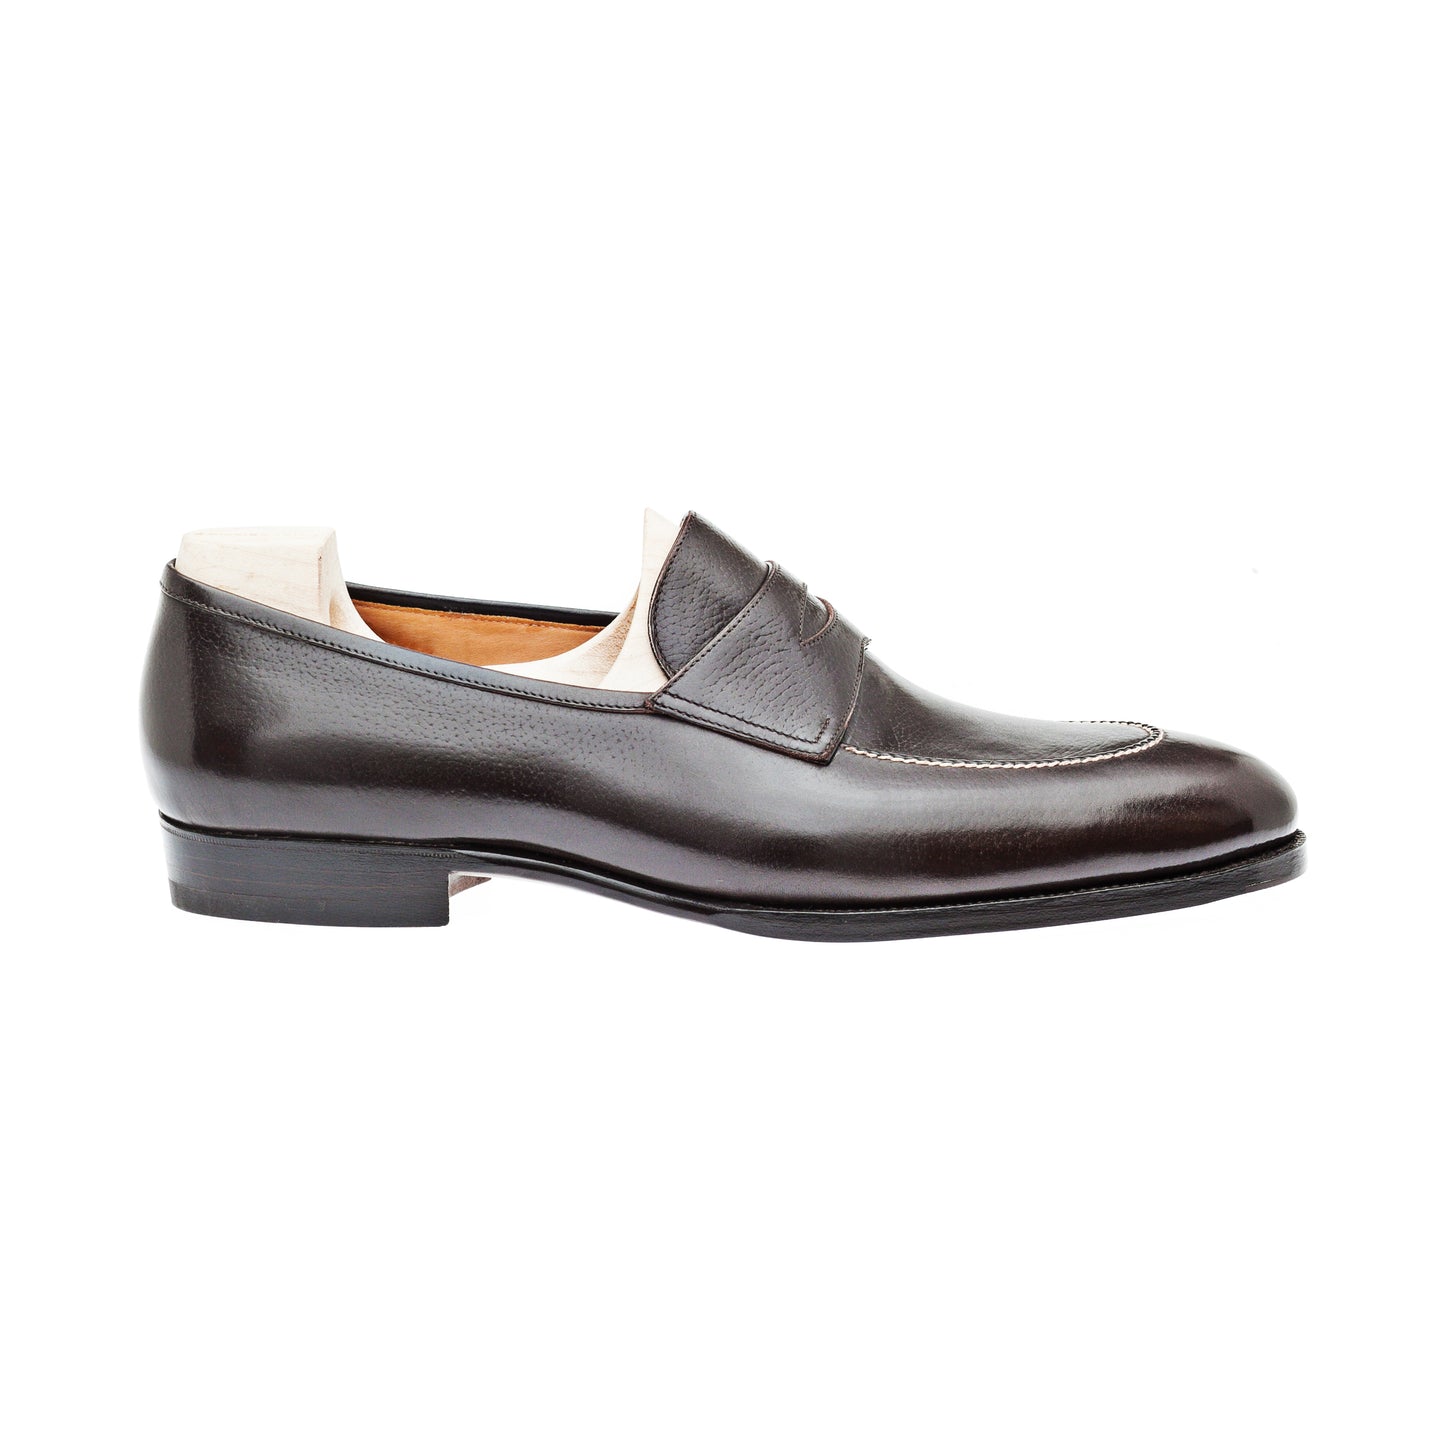 Penny - Classic penny loafer – Saint Crispin's